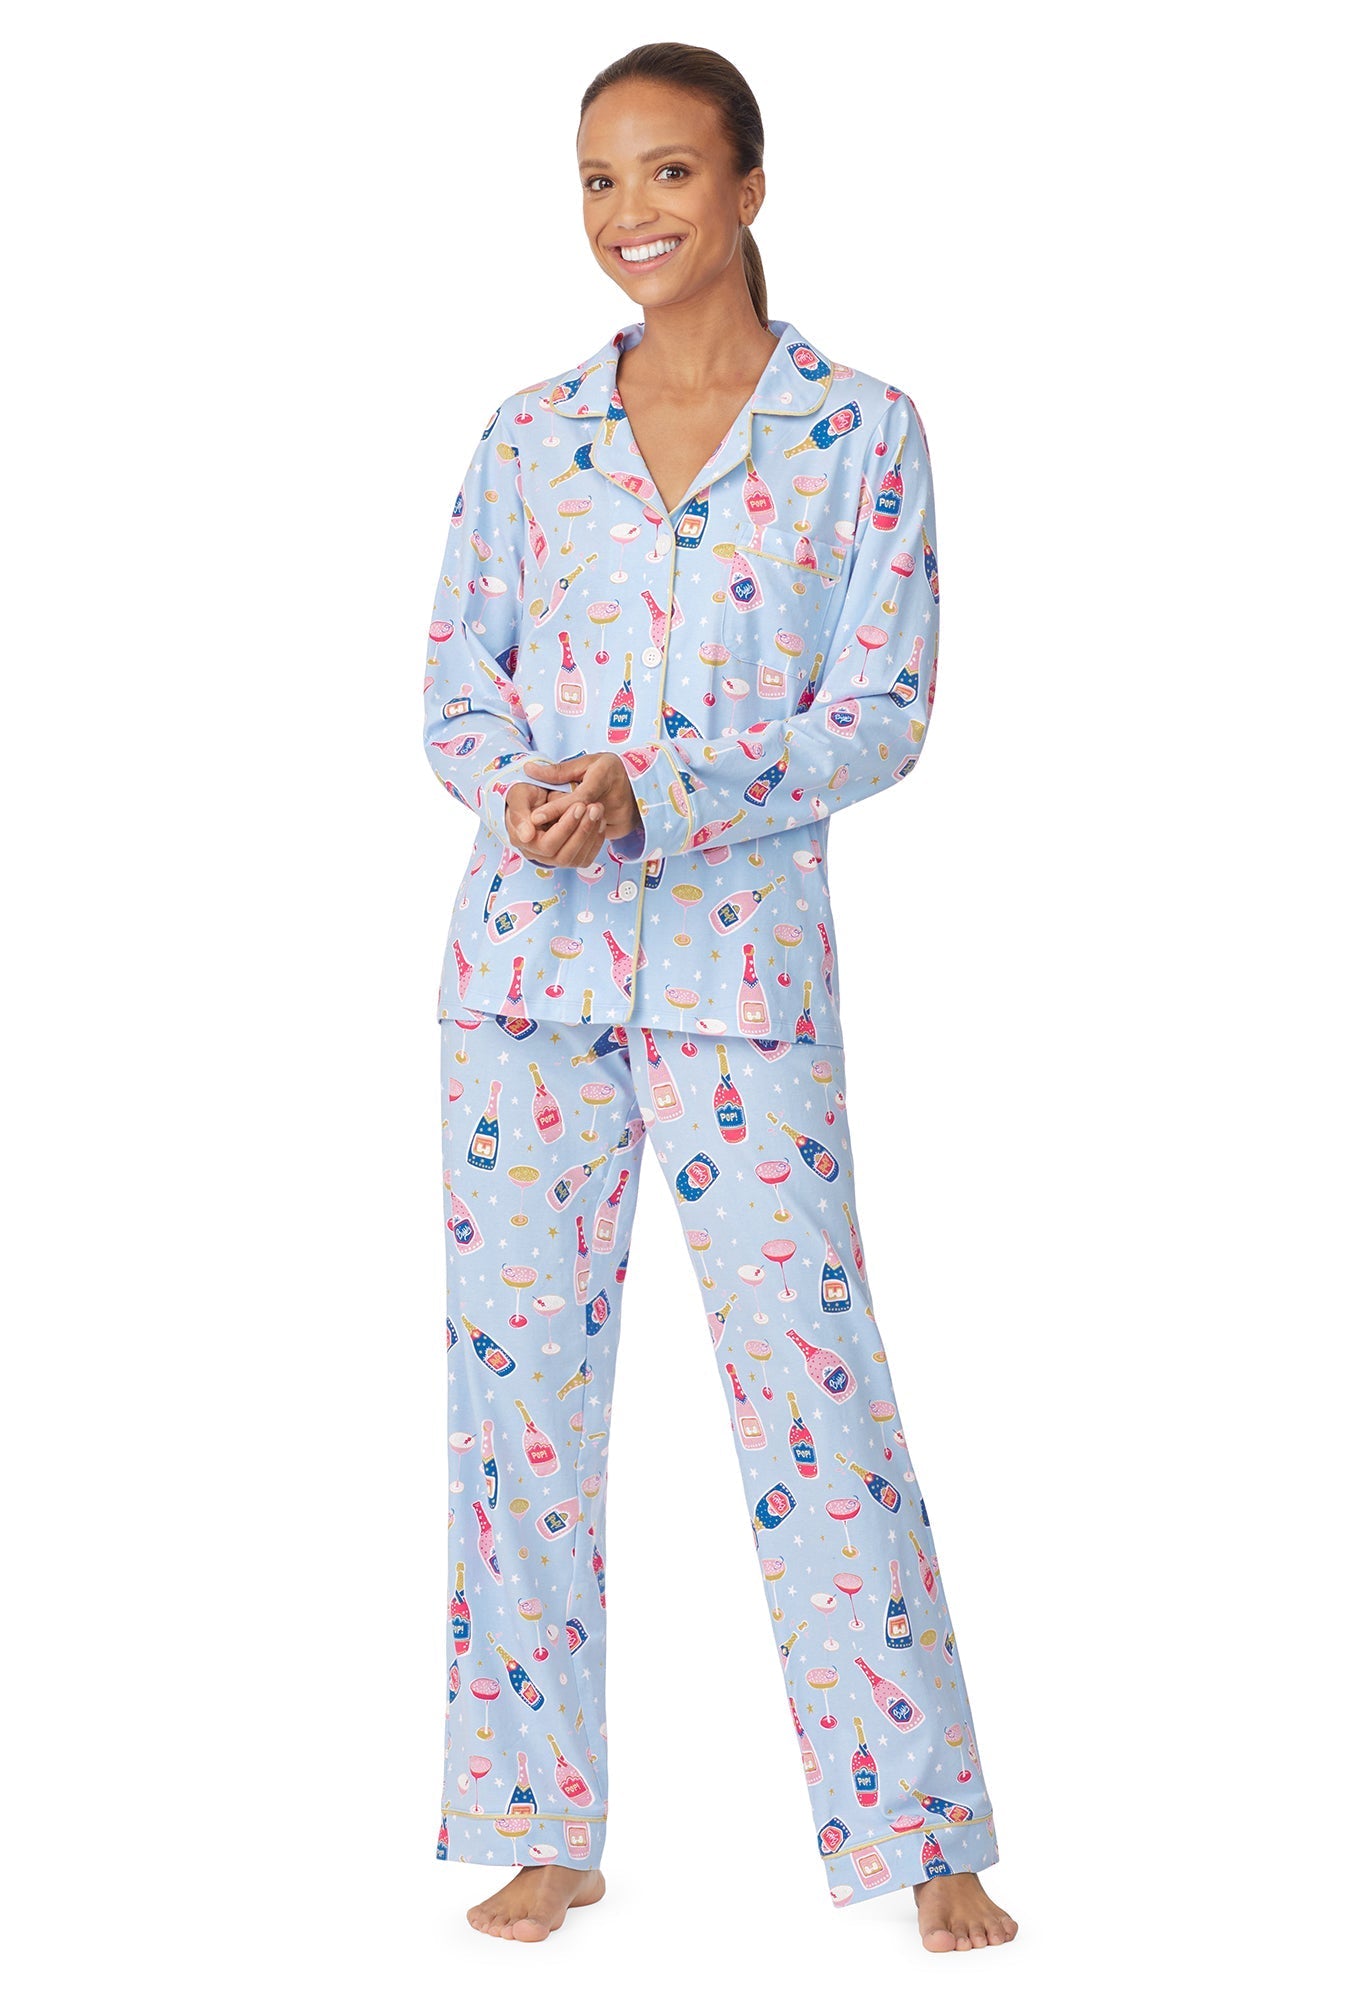 A lady wearing a blue long sleeve pj set with champagne pattern.